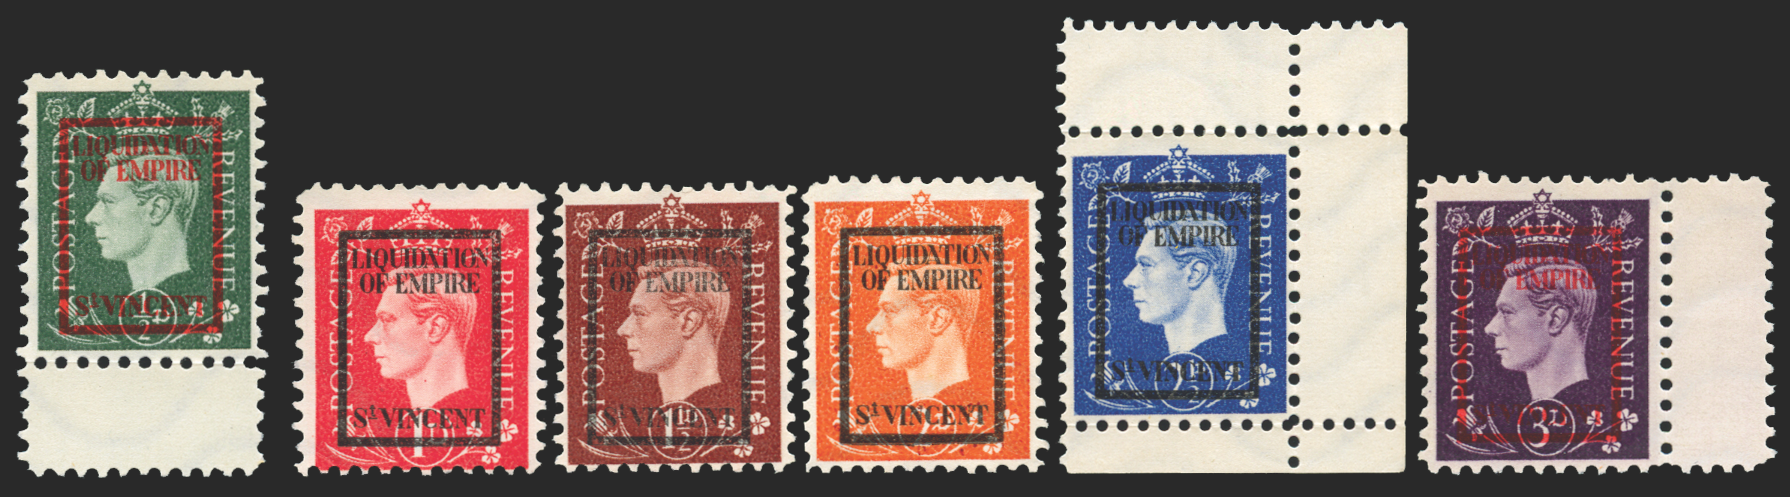 ST VINCENT 1944 German Propaganda forgeries of GB 1937-47 set of 6 to 3d